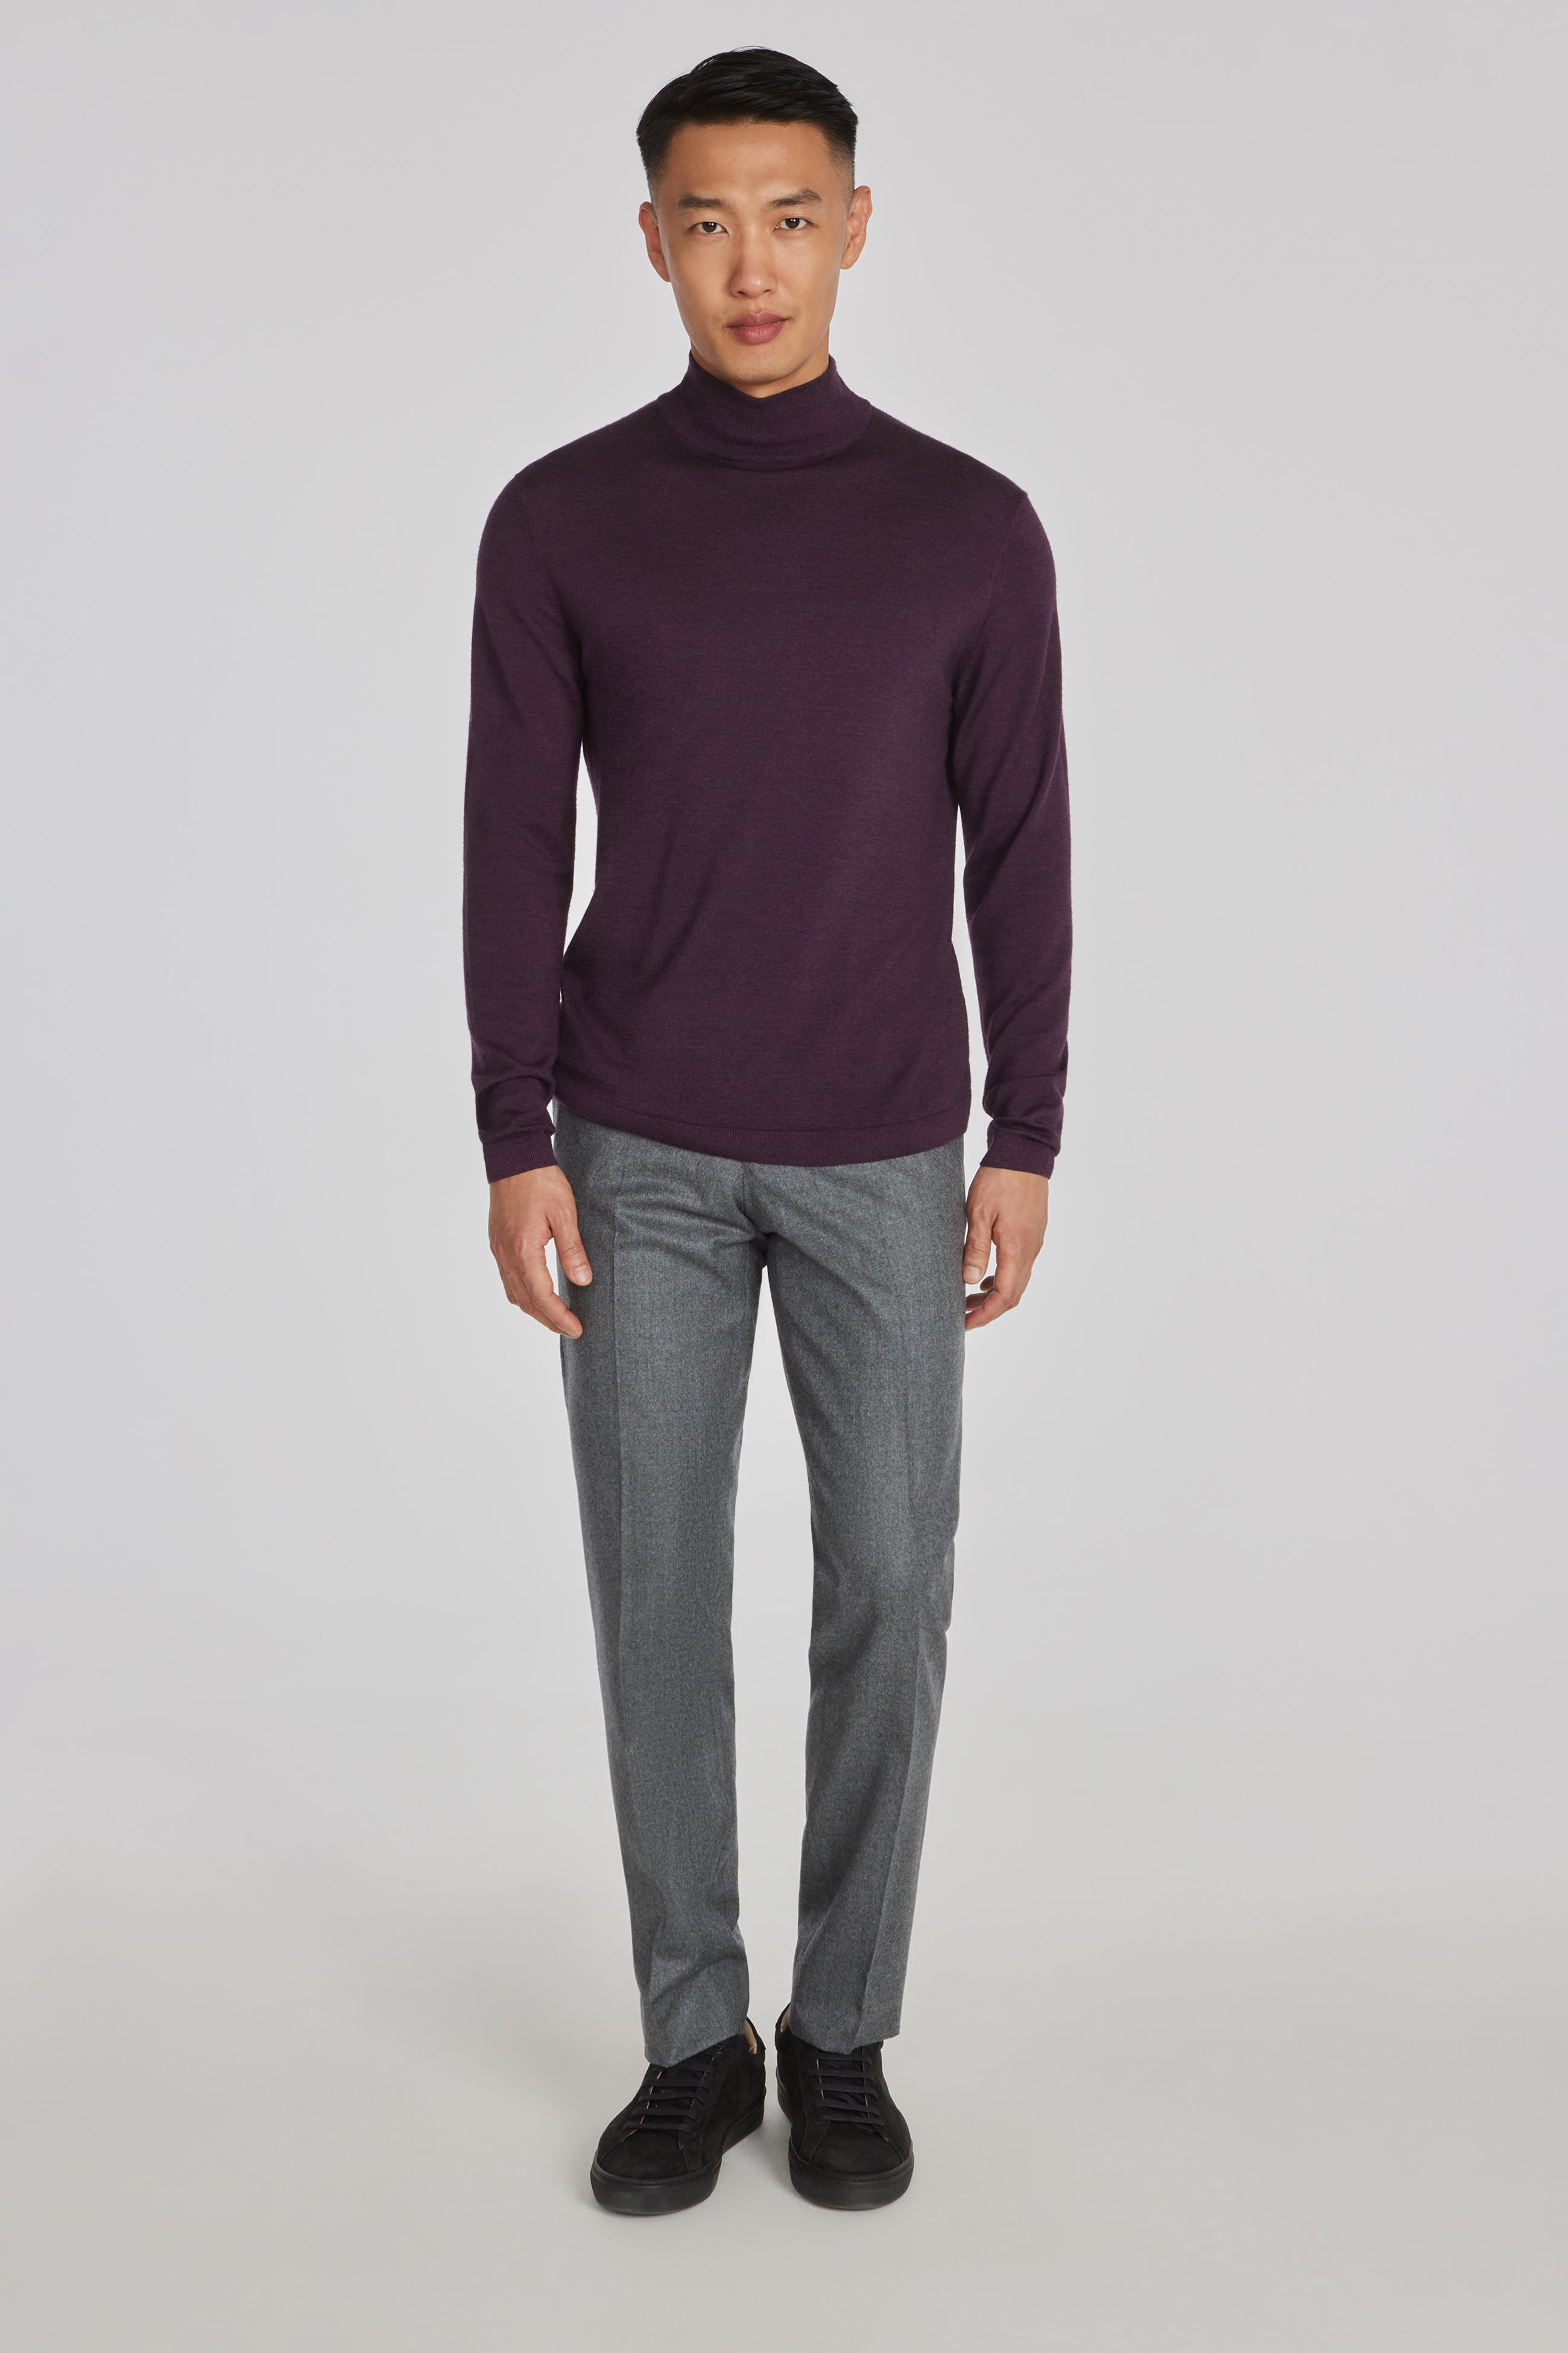 Alt view 3 Beaudry Wool, Silk and Cashmere Mock Neck Sweater in Plum